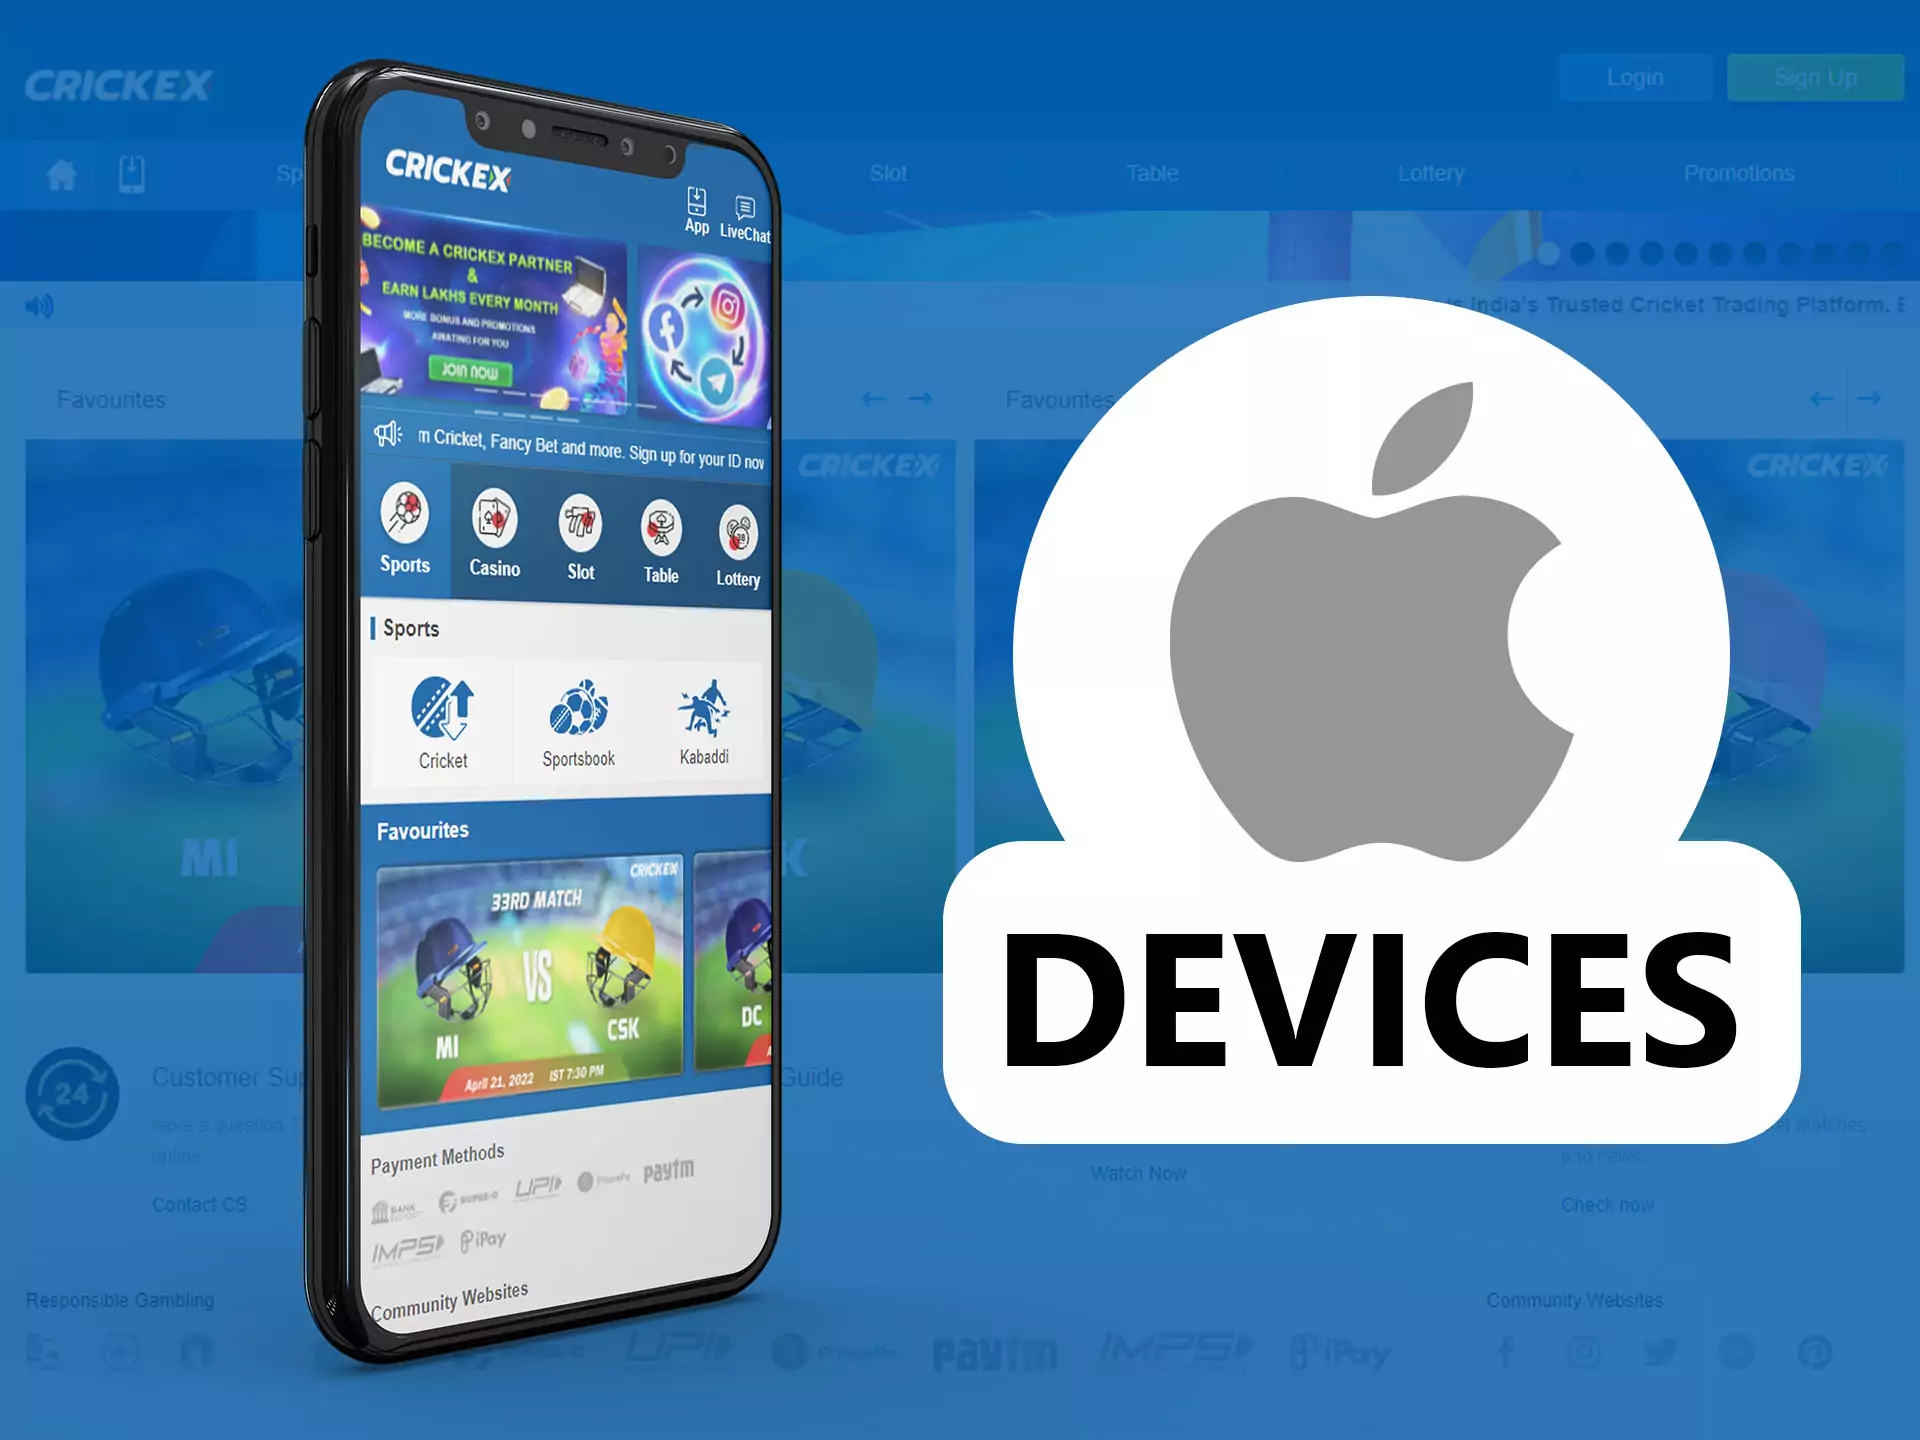 The Crickex app for iOS will support most devices.